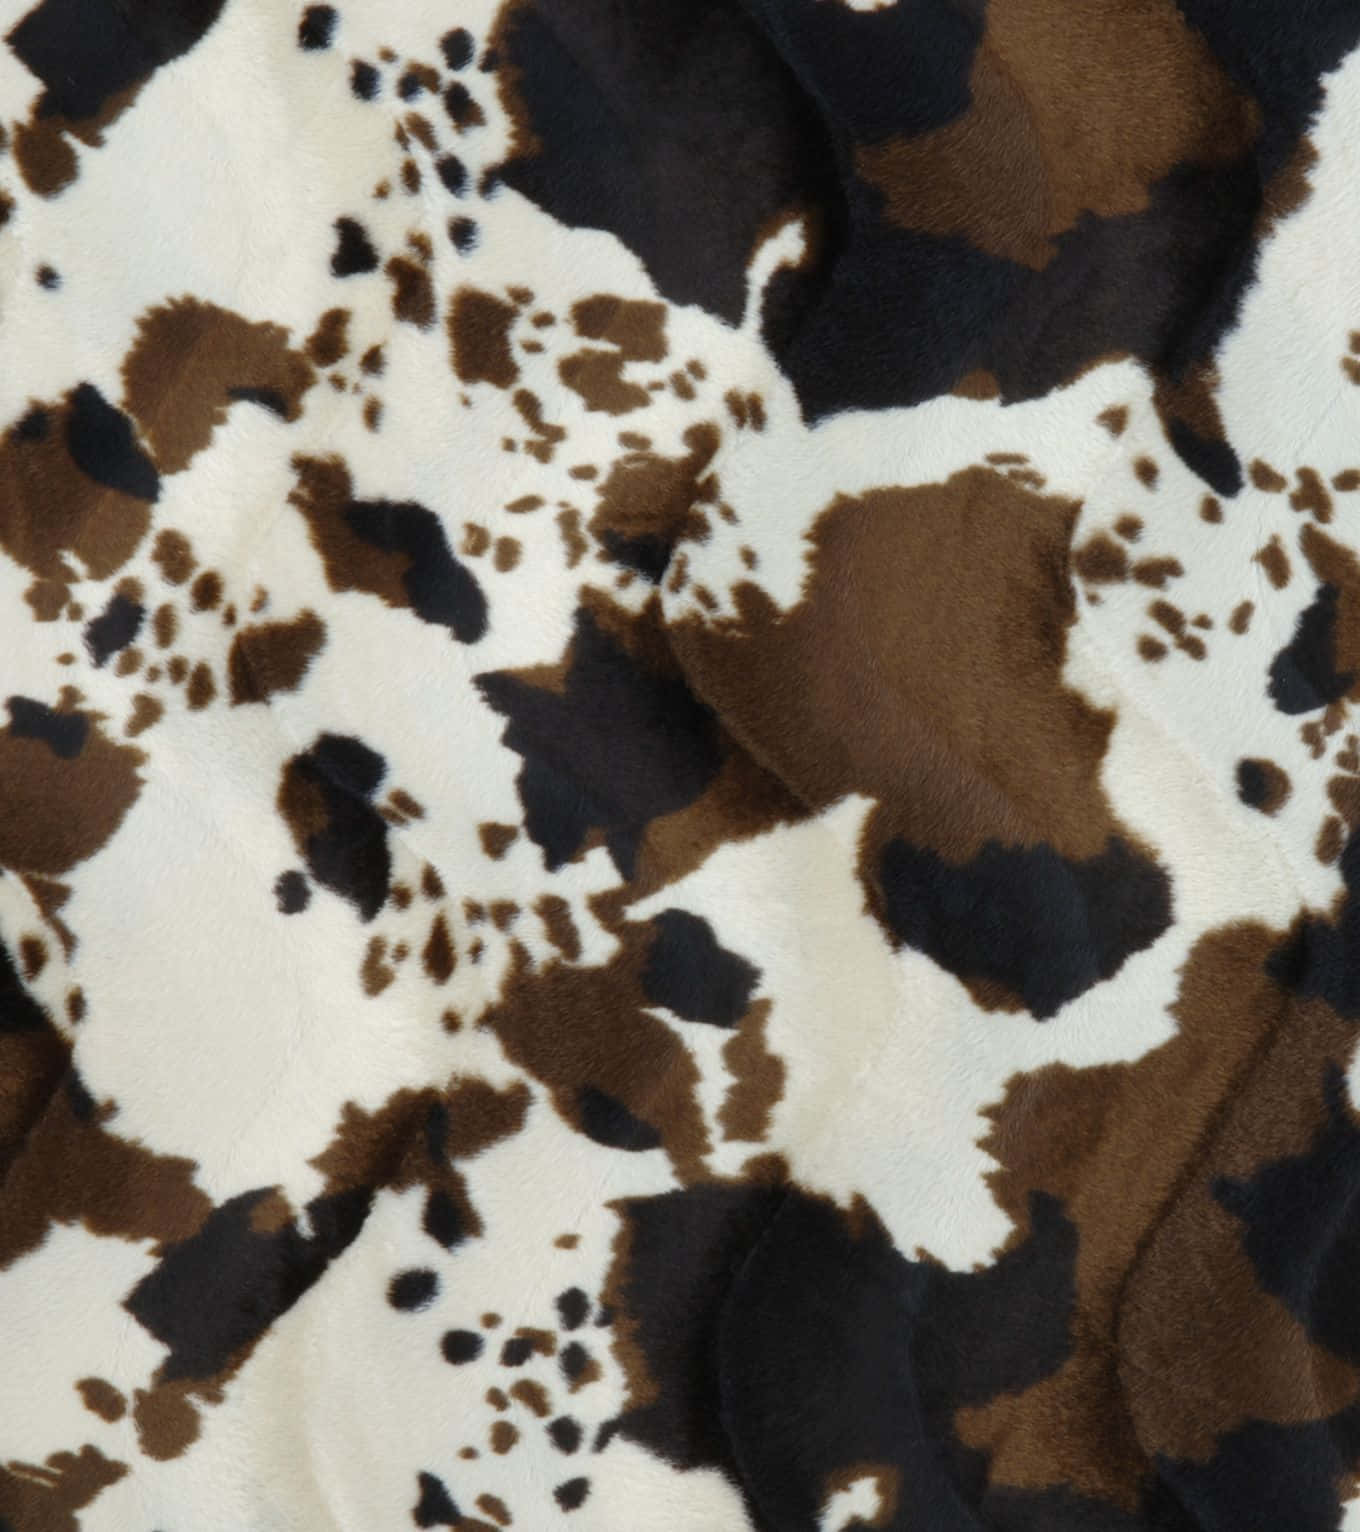 42600 Cowhide Stock Photos Pictures  RoyaltyFree Images  iStock   Cowhide rug Cowhide texture Cowhide sofa